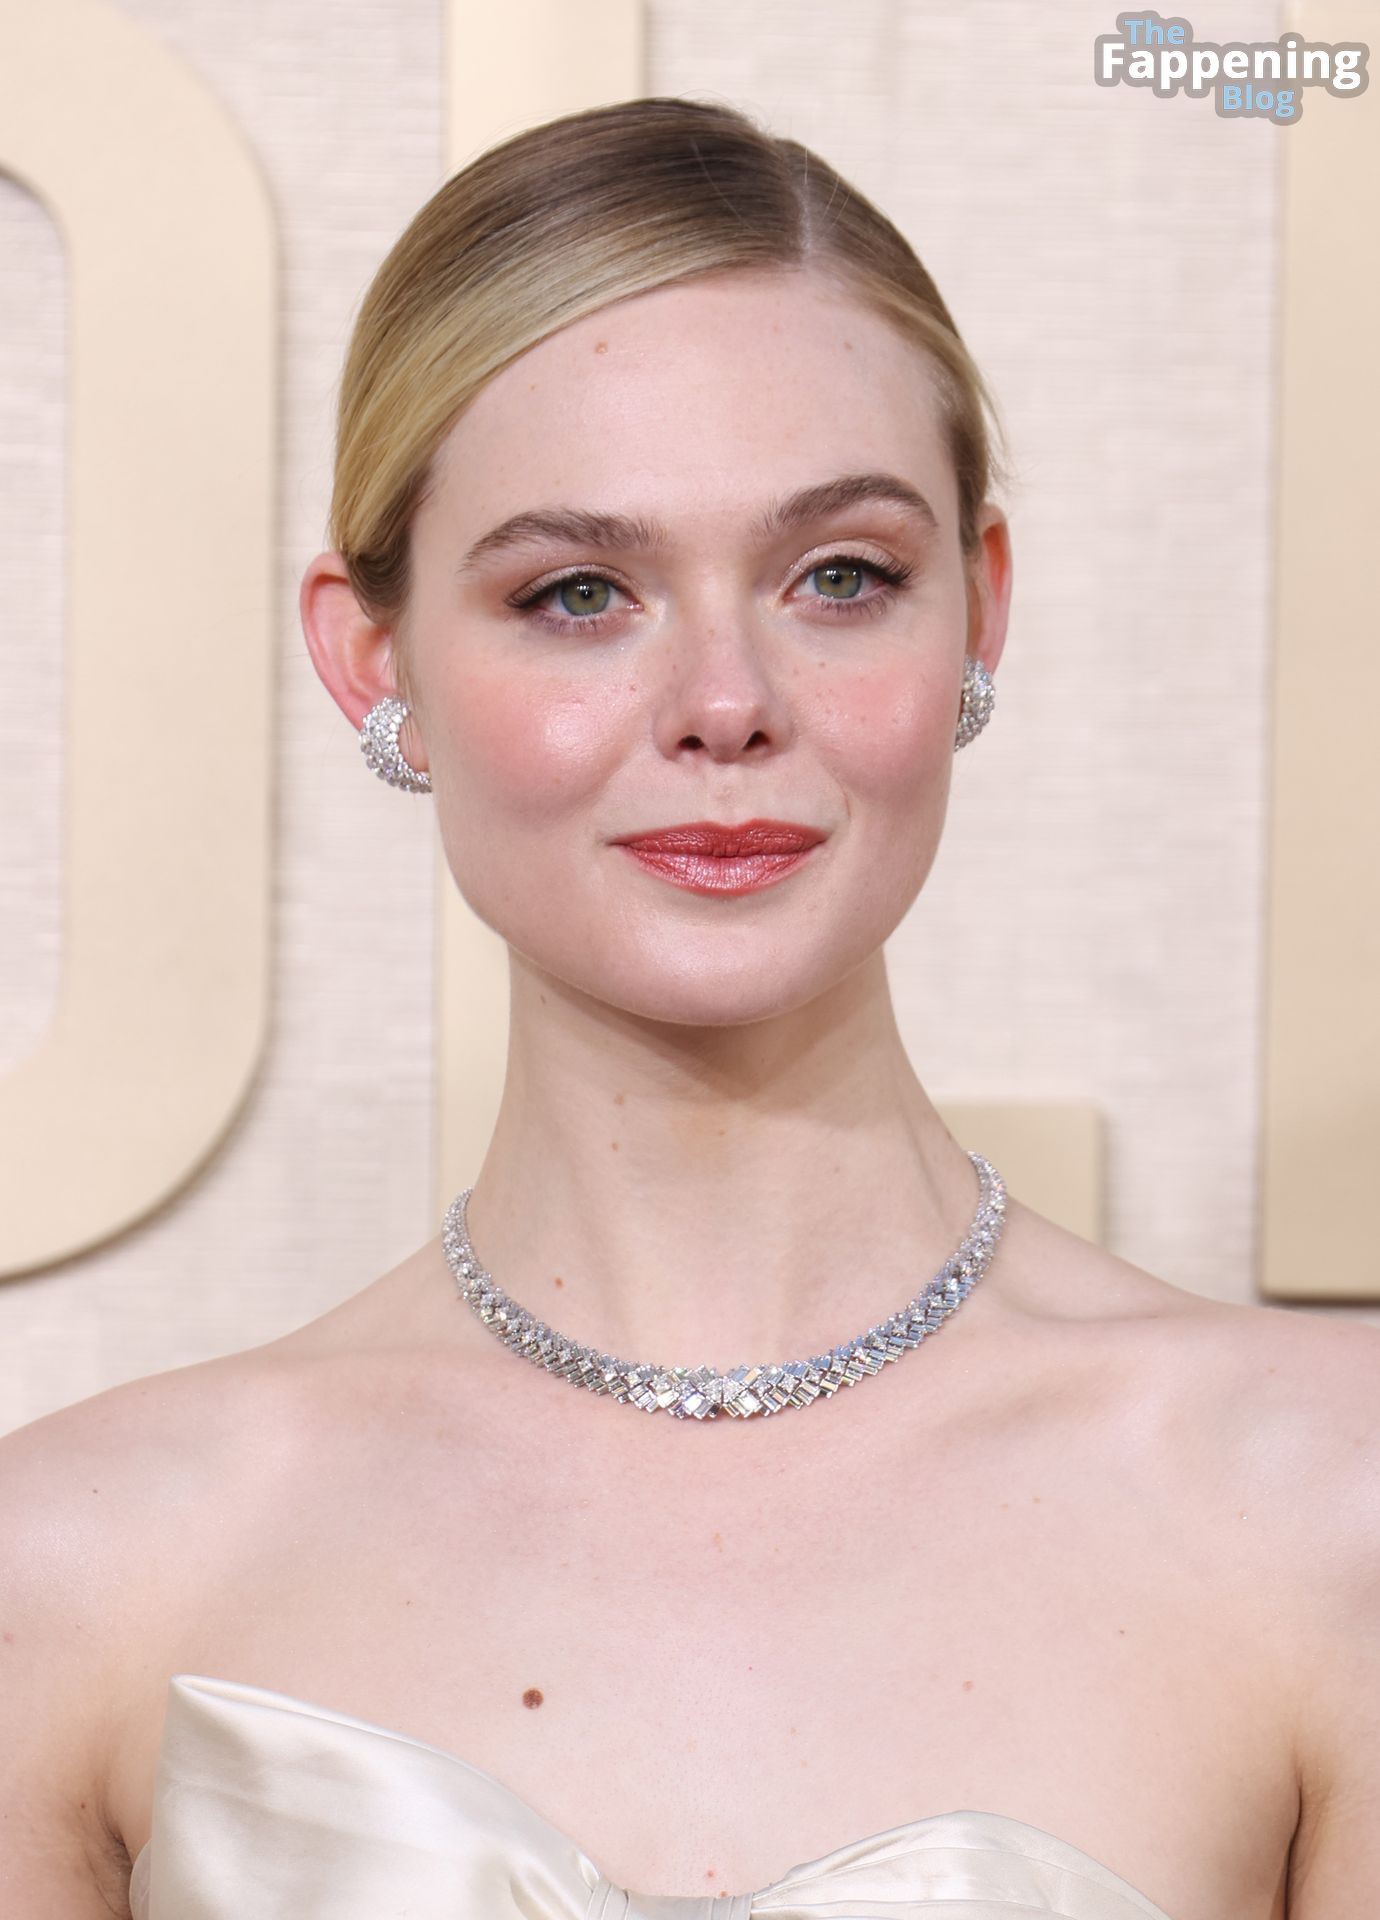 Elle-Fanning-Sexy-68-The-Fappening-Blog.jpg